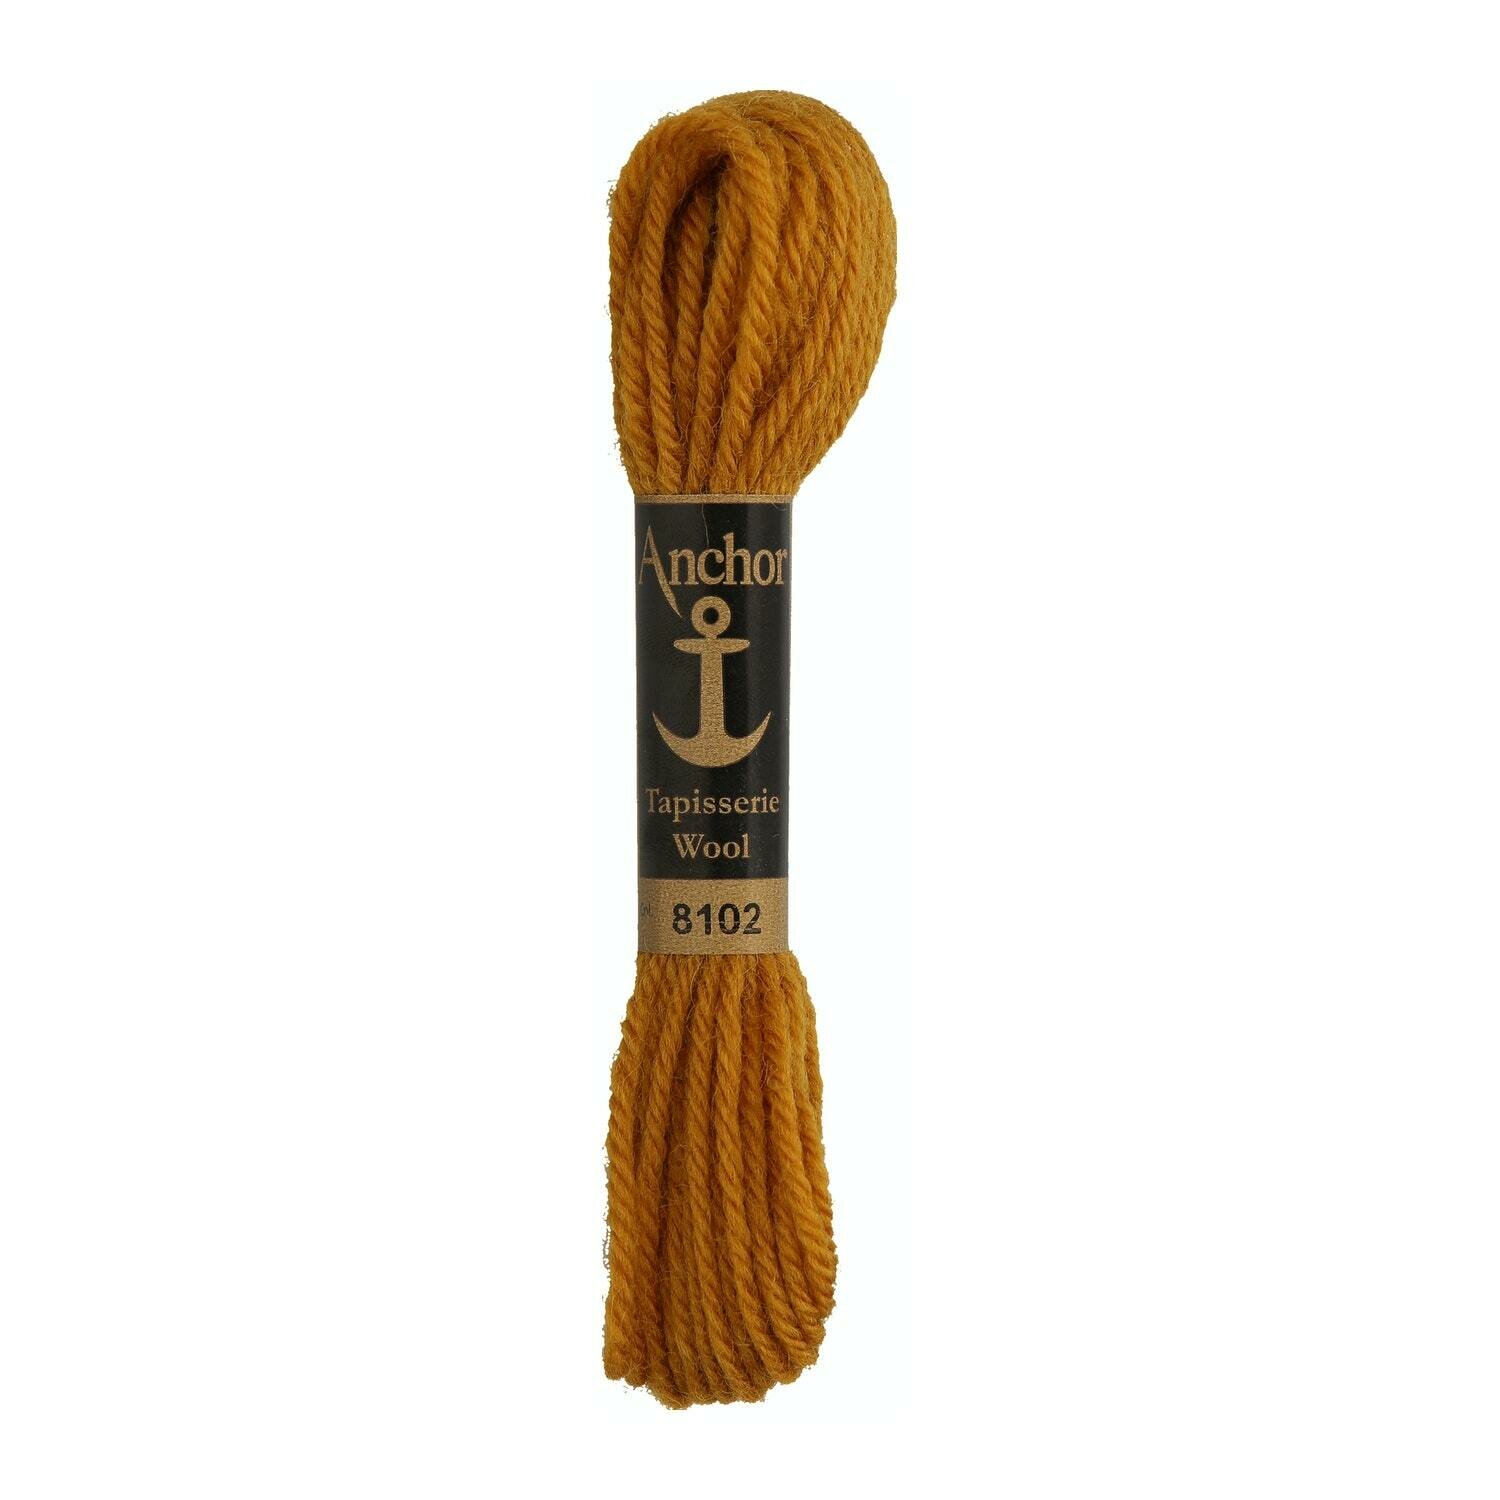 Anchor Tapisserie Wool #  08102